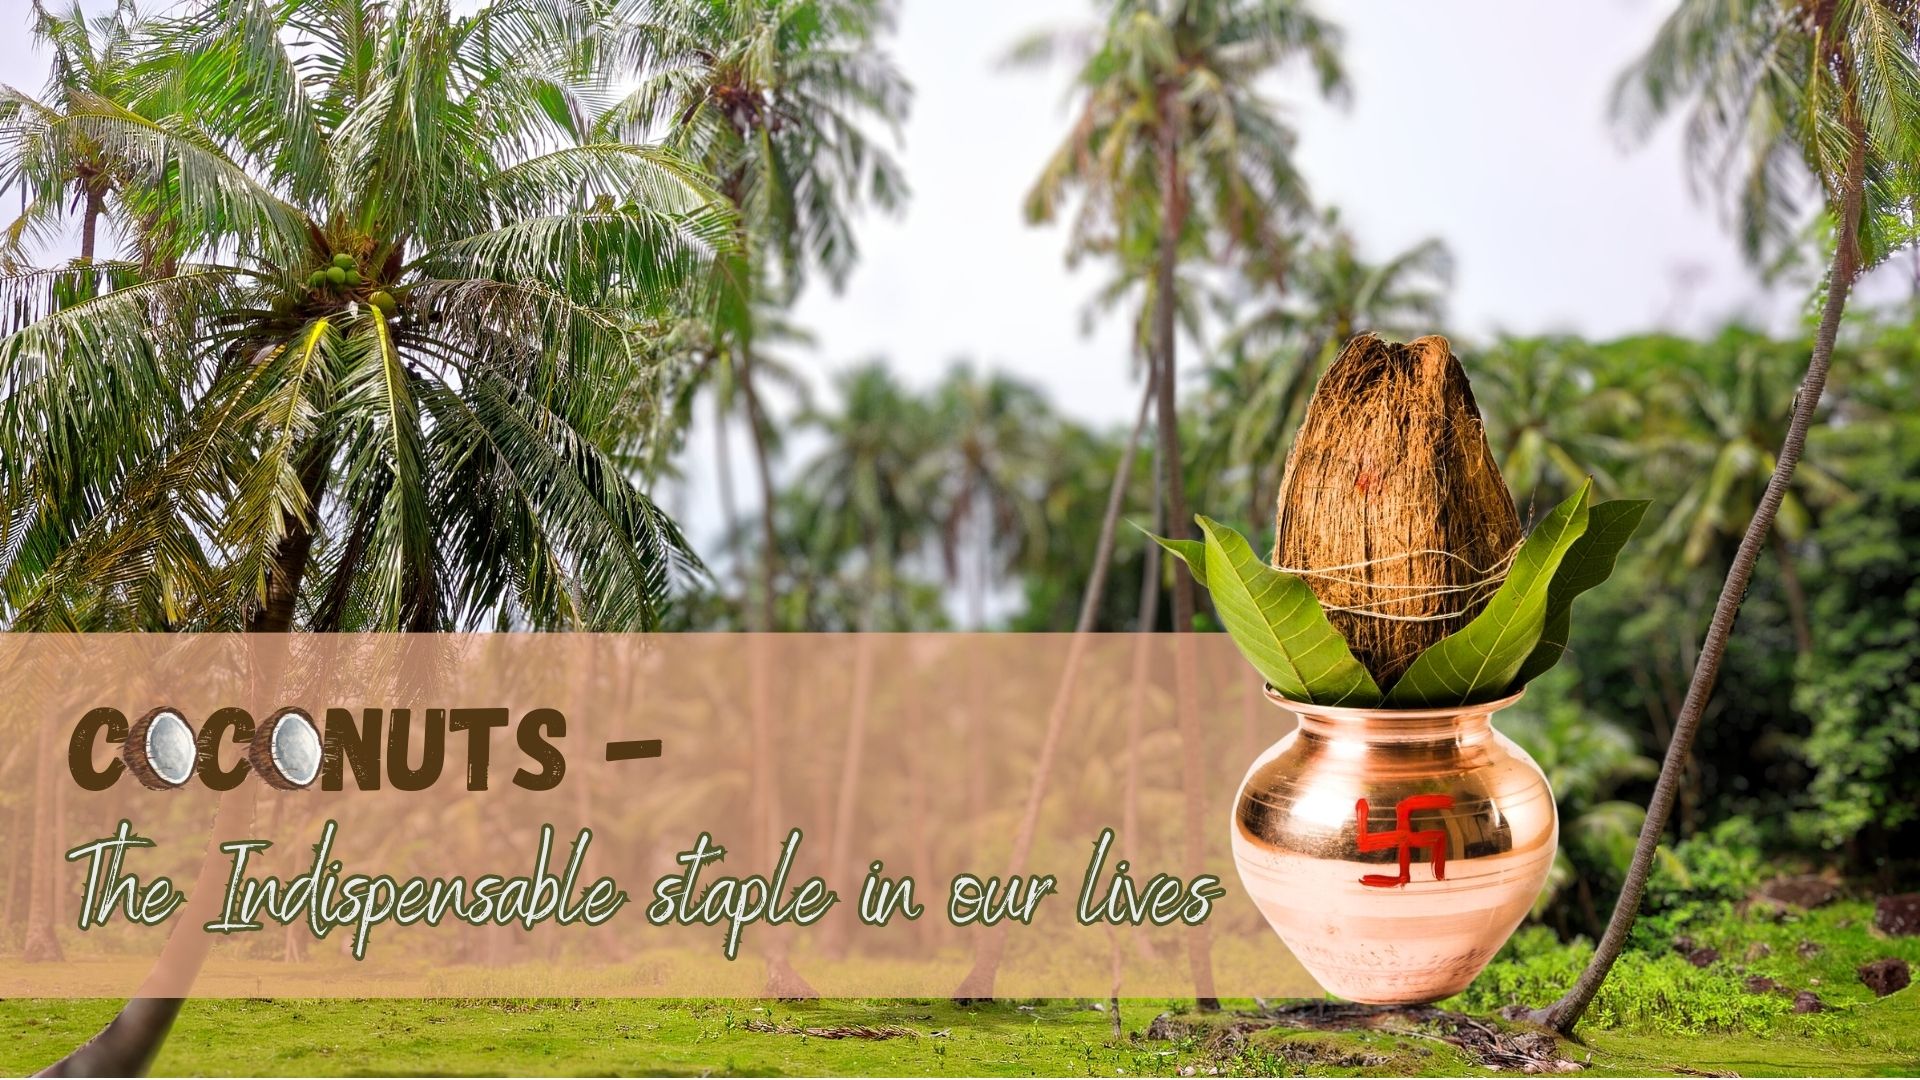 Coconuts - The Indispensable staple in our lives